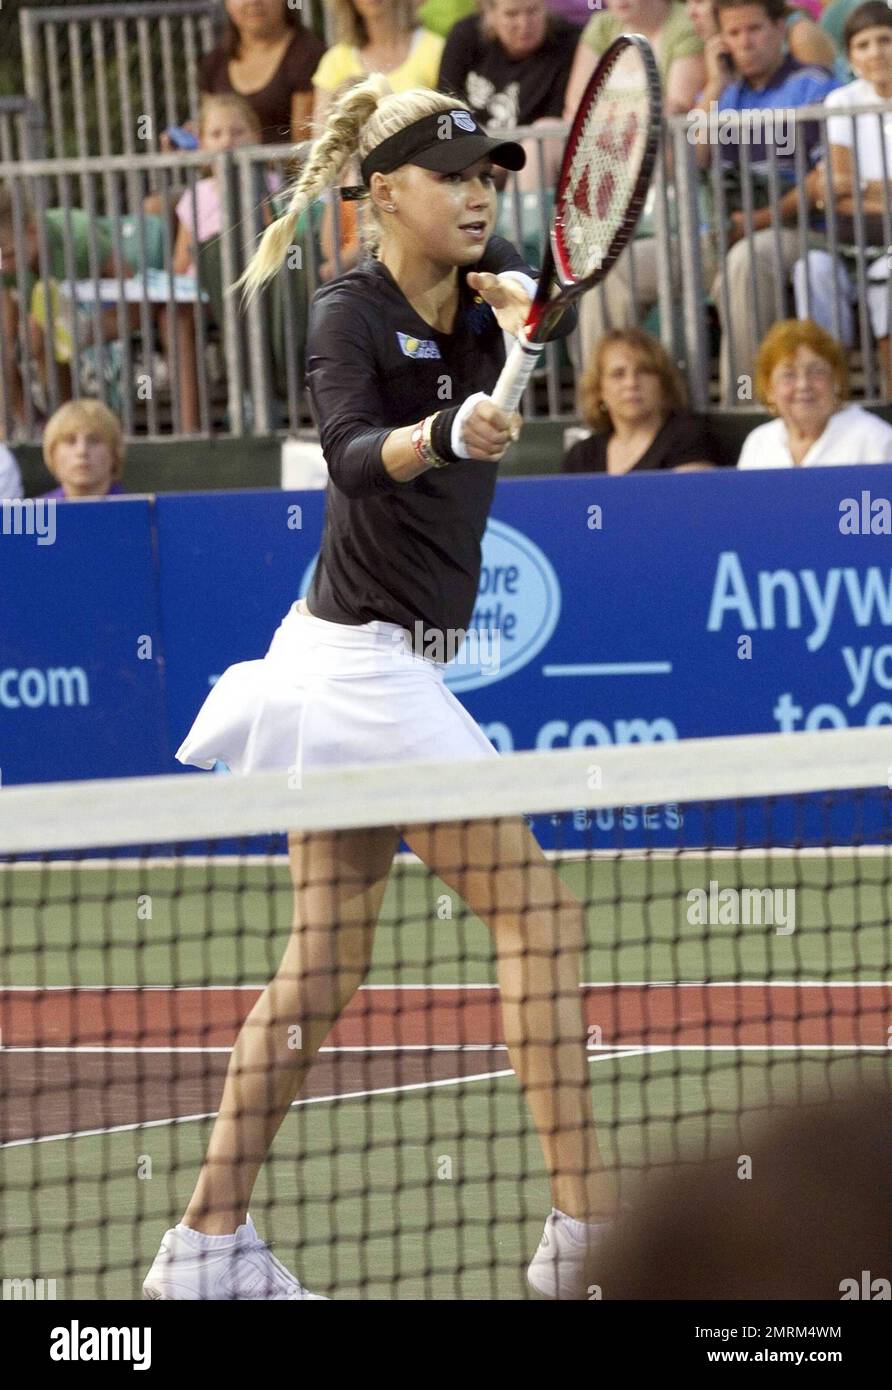 Anna Kournikova plays in the women's doubles match with the St. Louis Aces  during their game against the Boston Lobsters in the WTT Professional Tennis  League tournament at Ferncroft Country Club. The